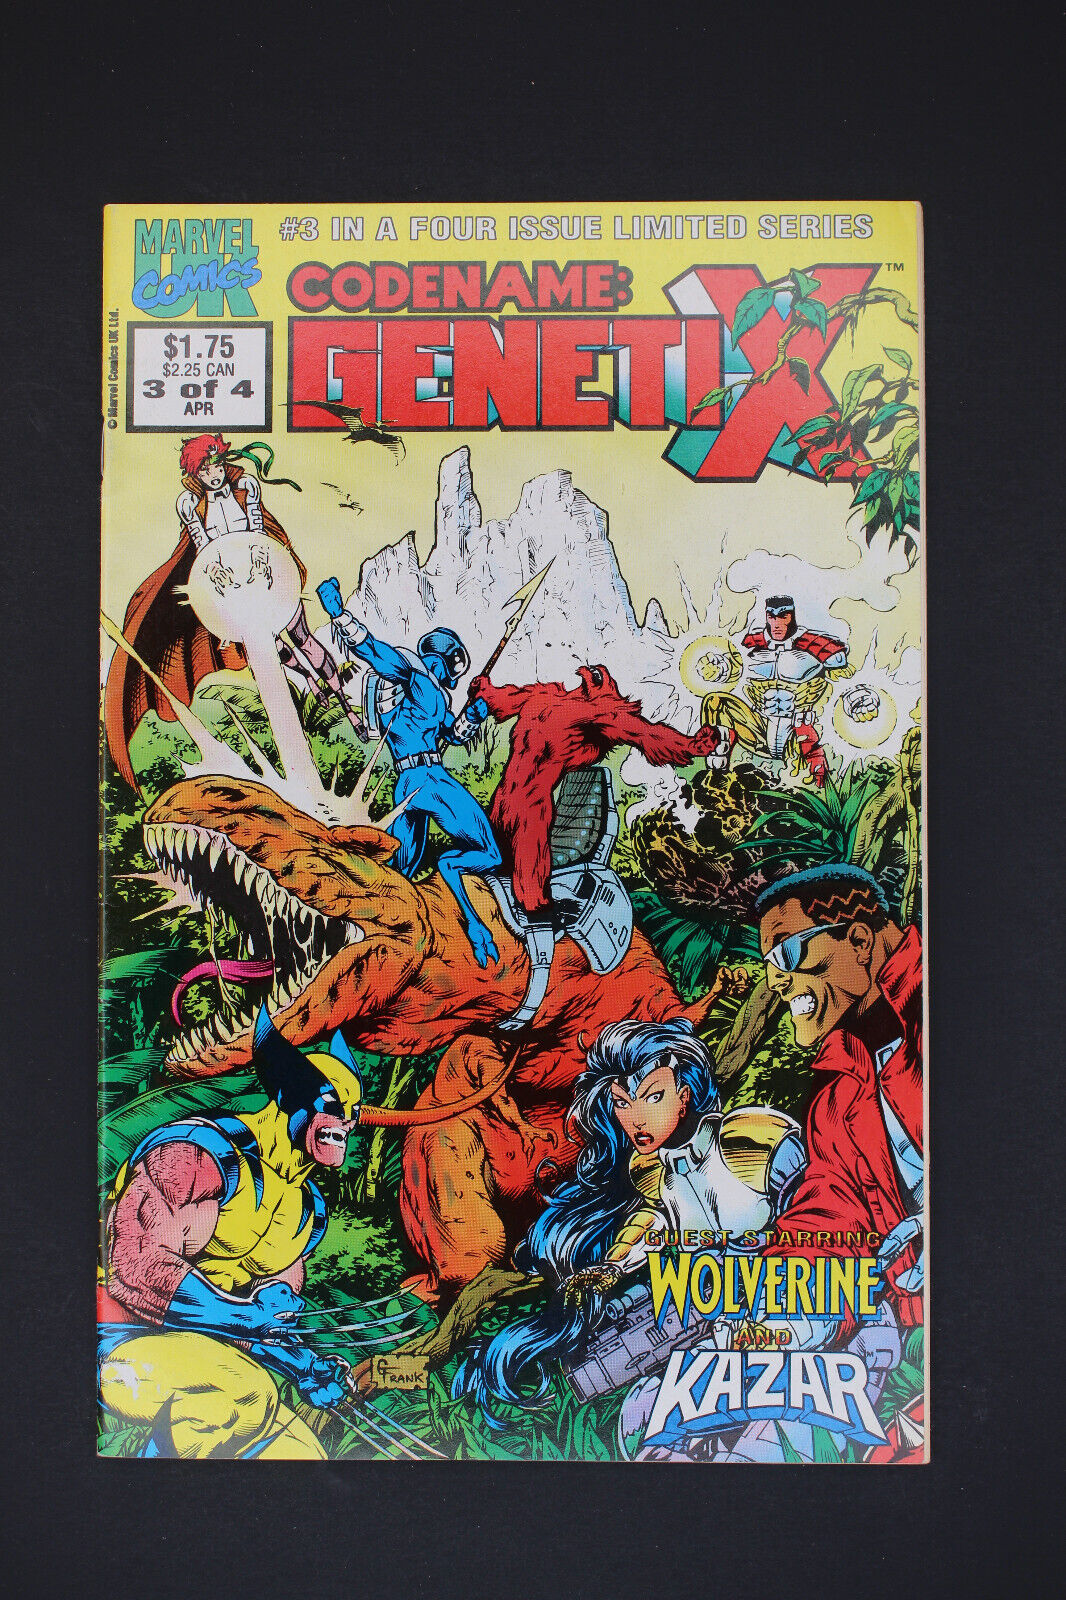 CODENAME GENETIX #3 MARVEL COMICS 1993 BAGGED AND BOARDED